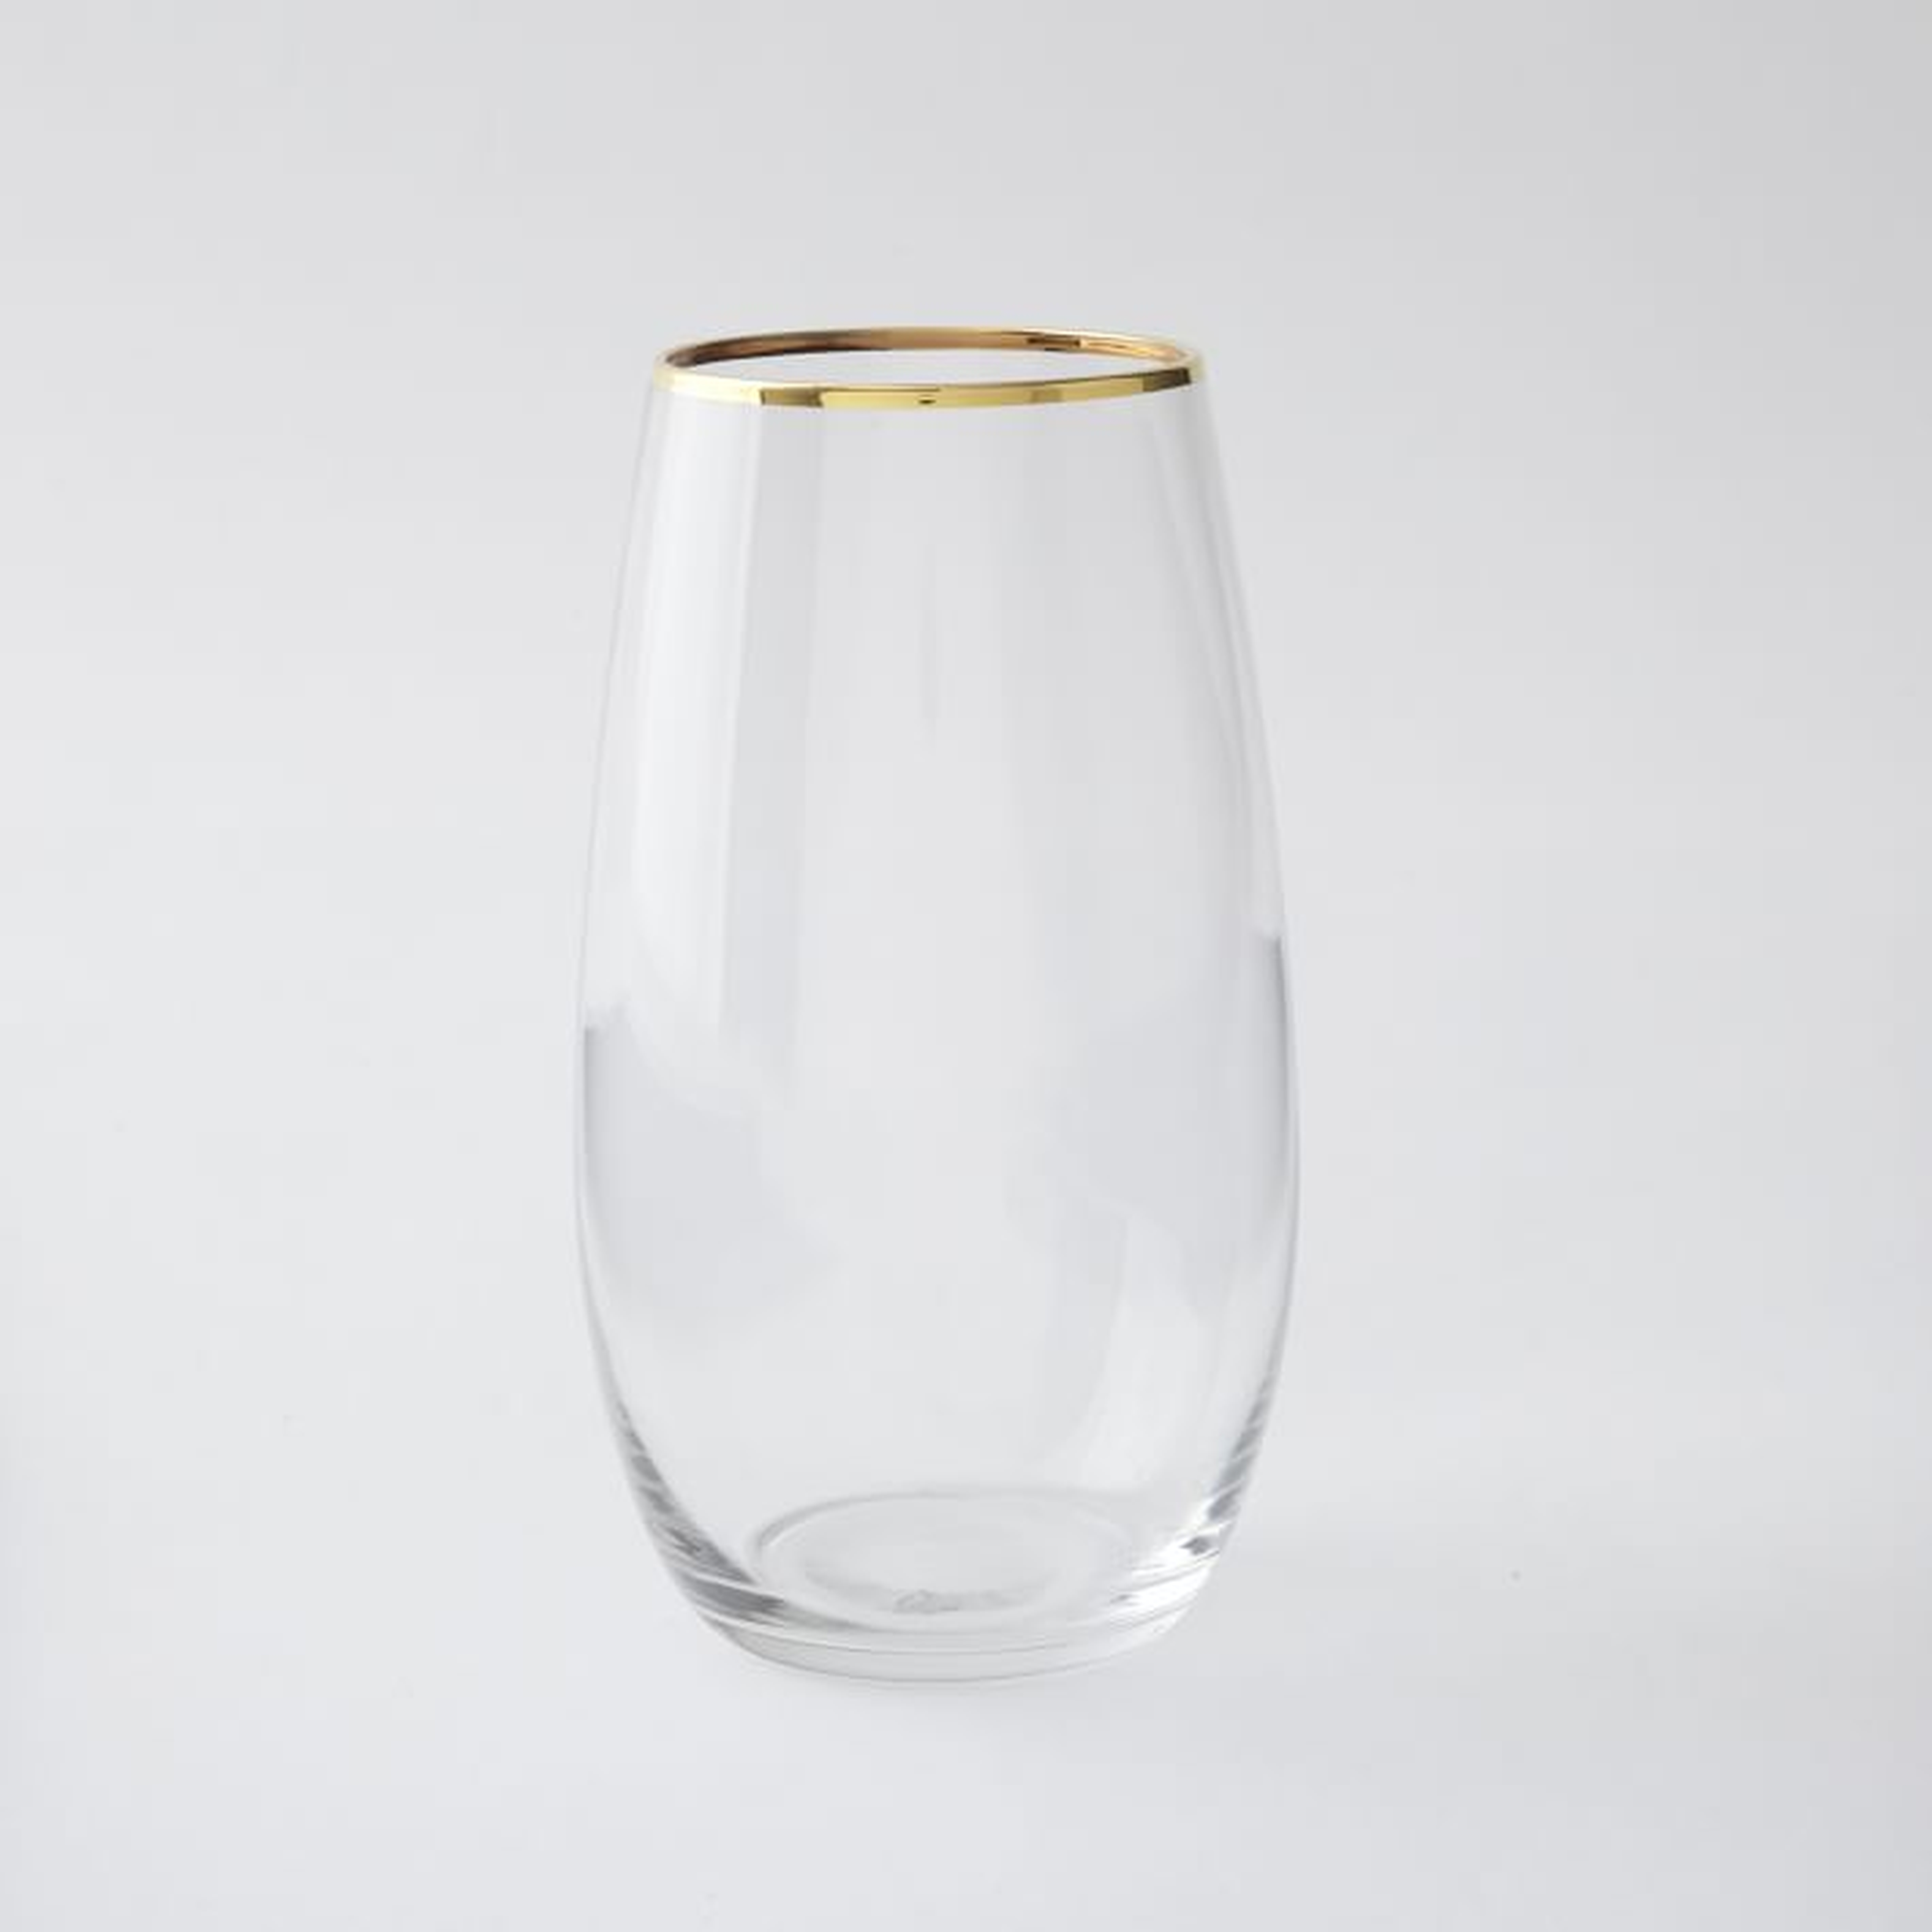 Stemless Glassware (Set Of 4) - Gold Rimmed (water glass) - West Elm